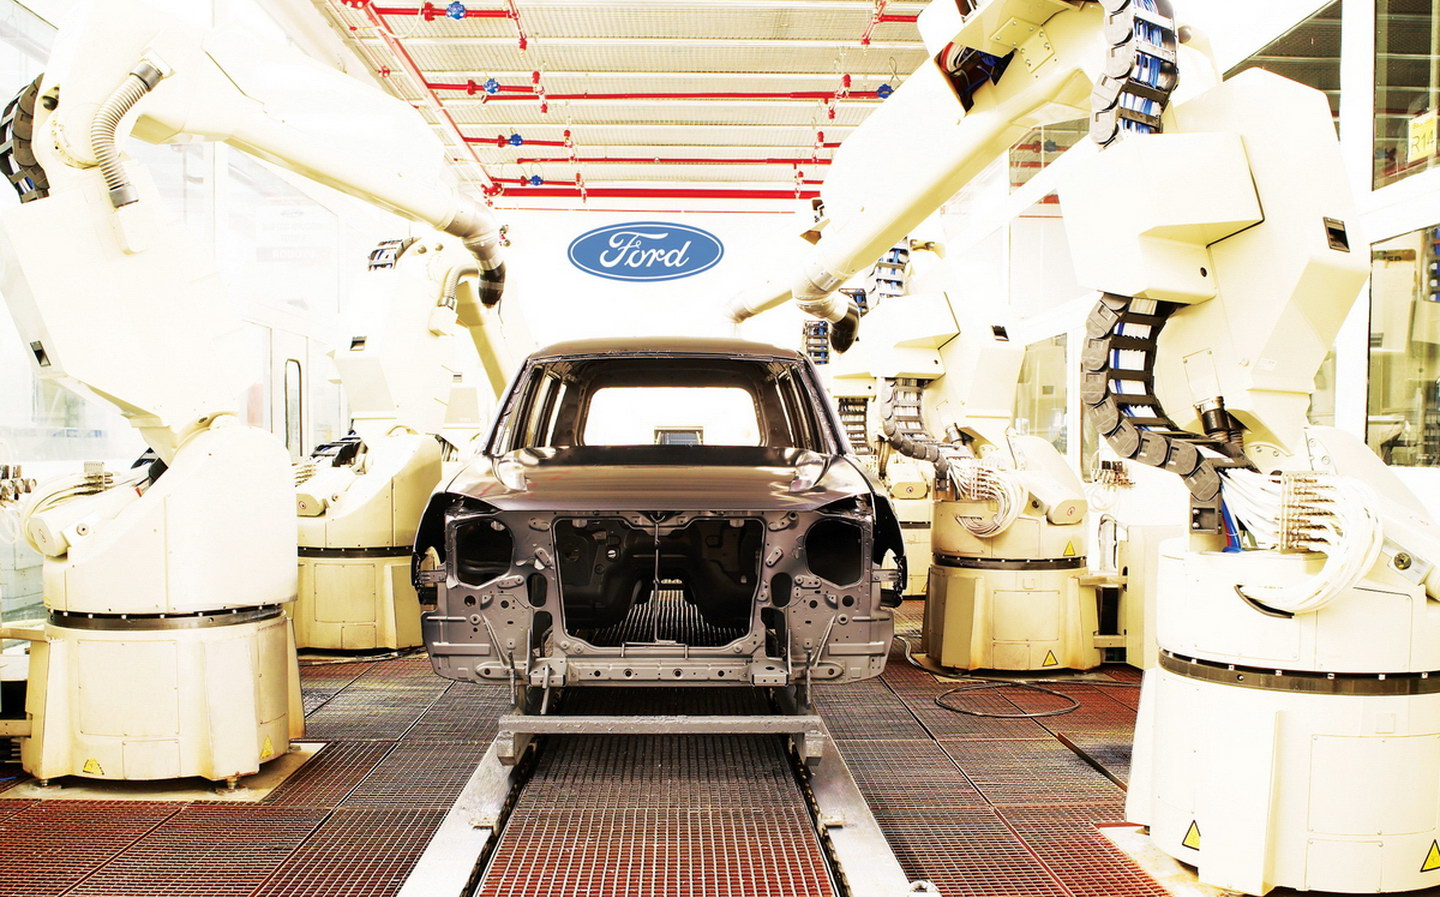 Ford manufacturing in India